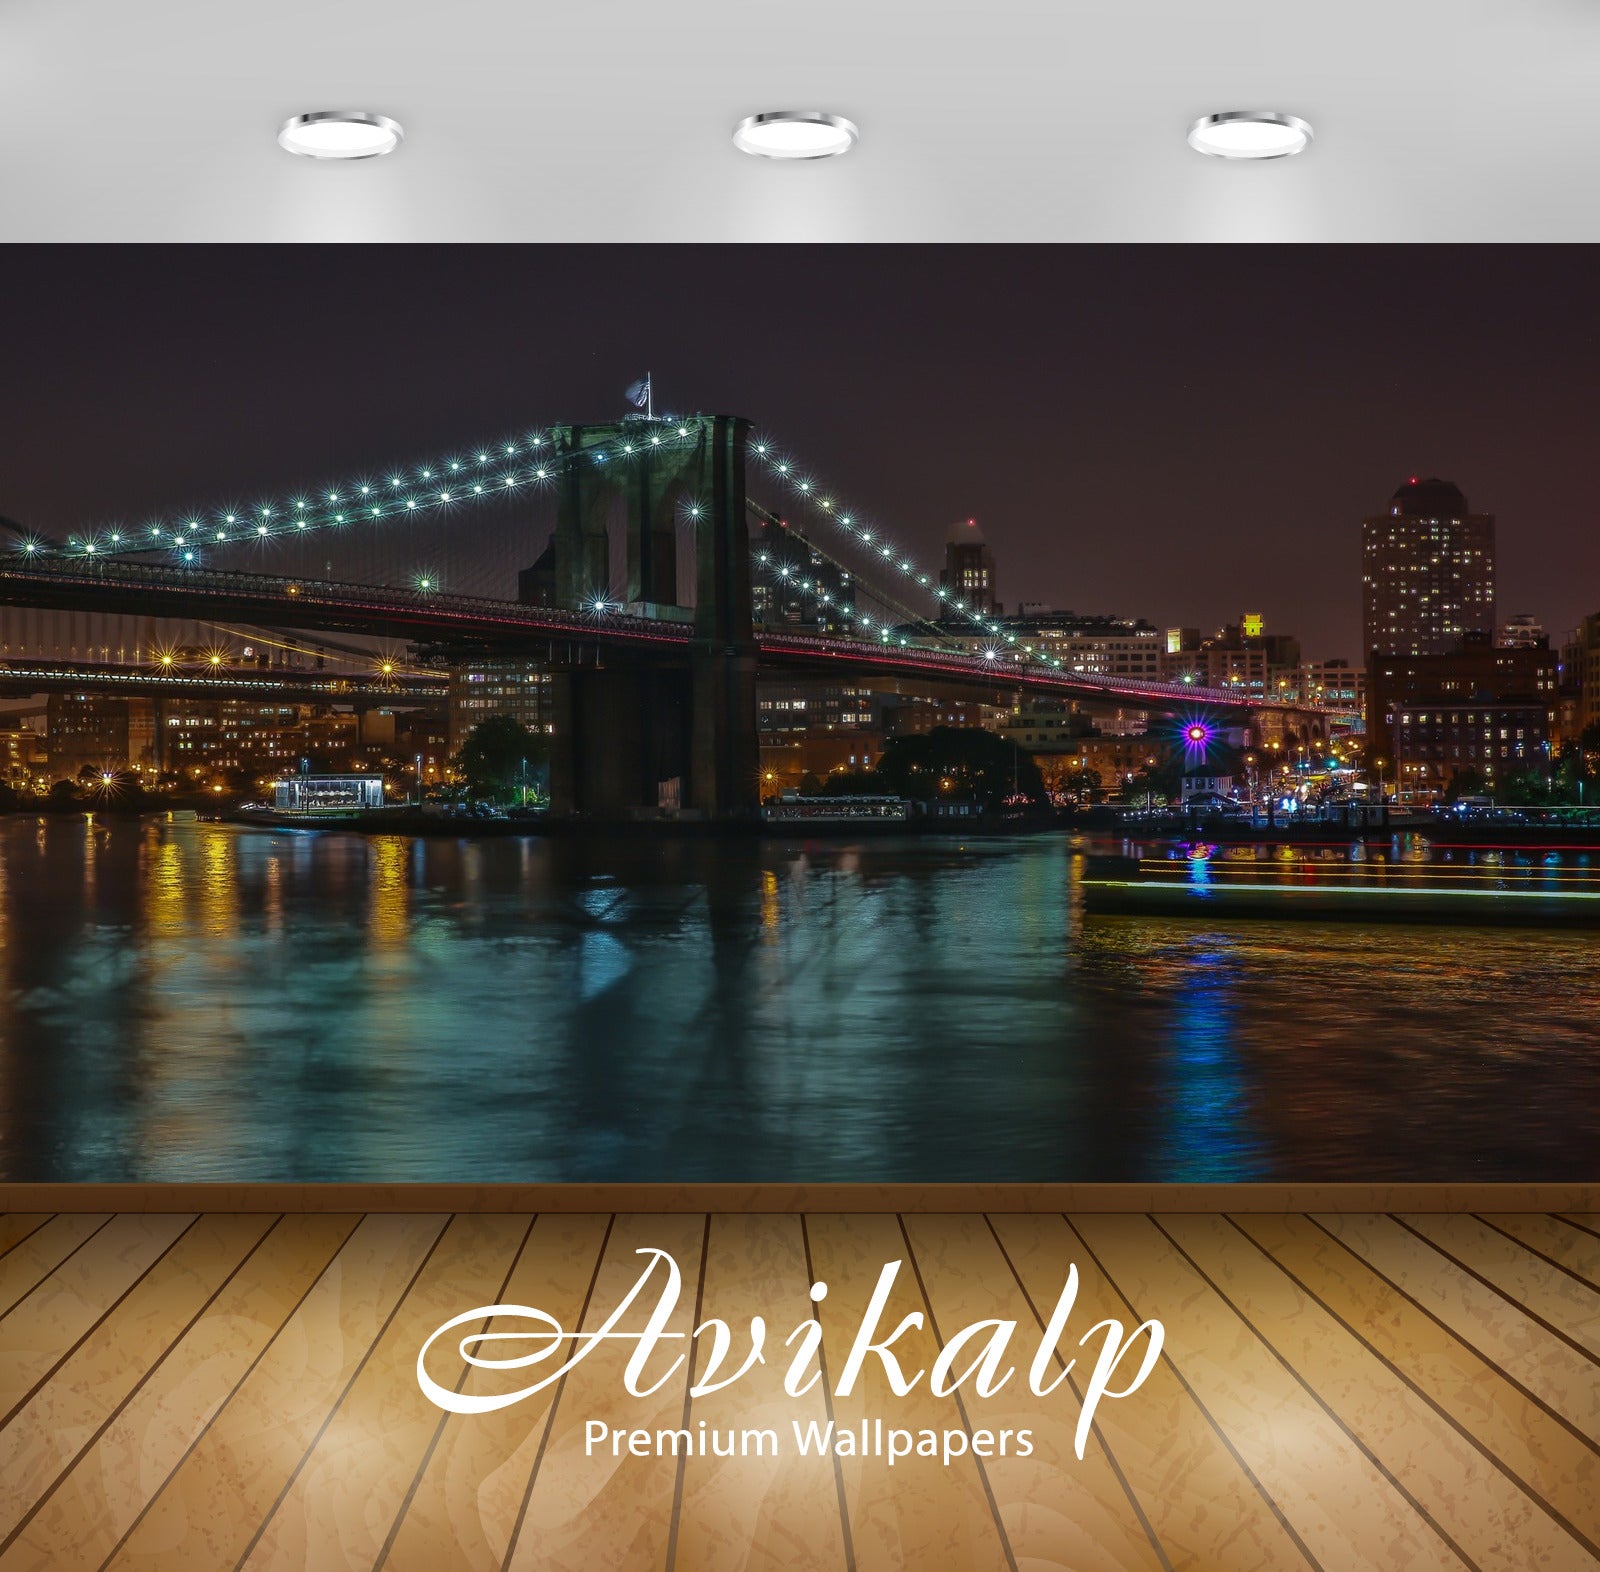 Avikalp Exclusive Awi1603 New York City Full HD Wallpapers for Living room, Hall, Kids Room, Kitchen